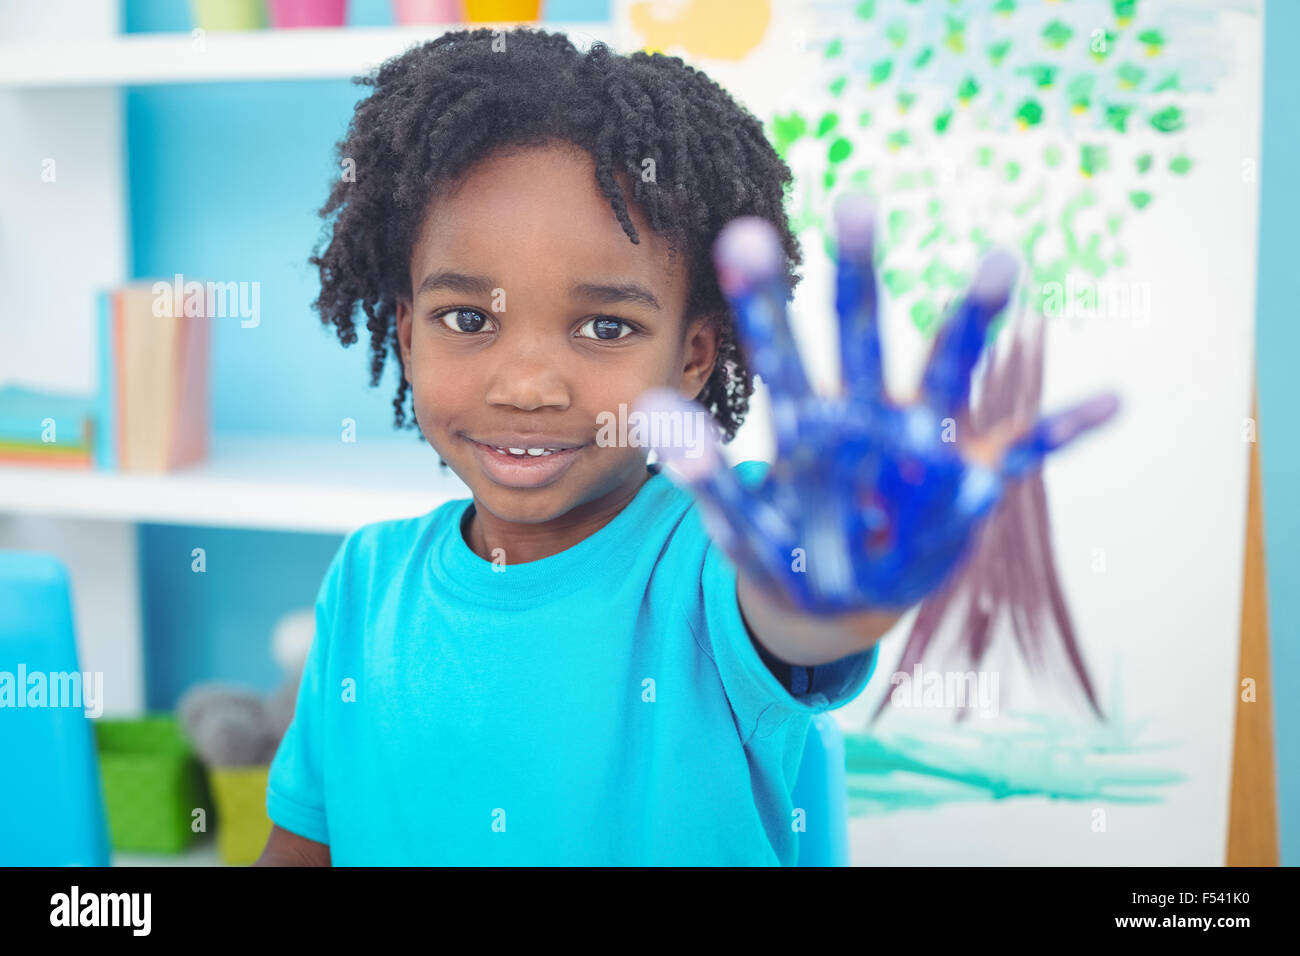 Happy kid enjoying painting with his hands Stock Photo